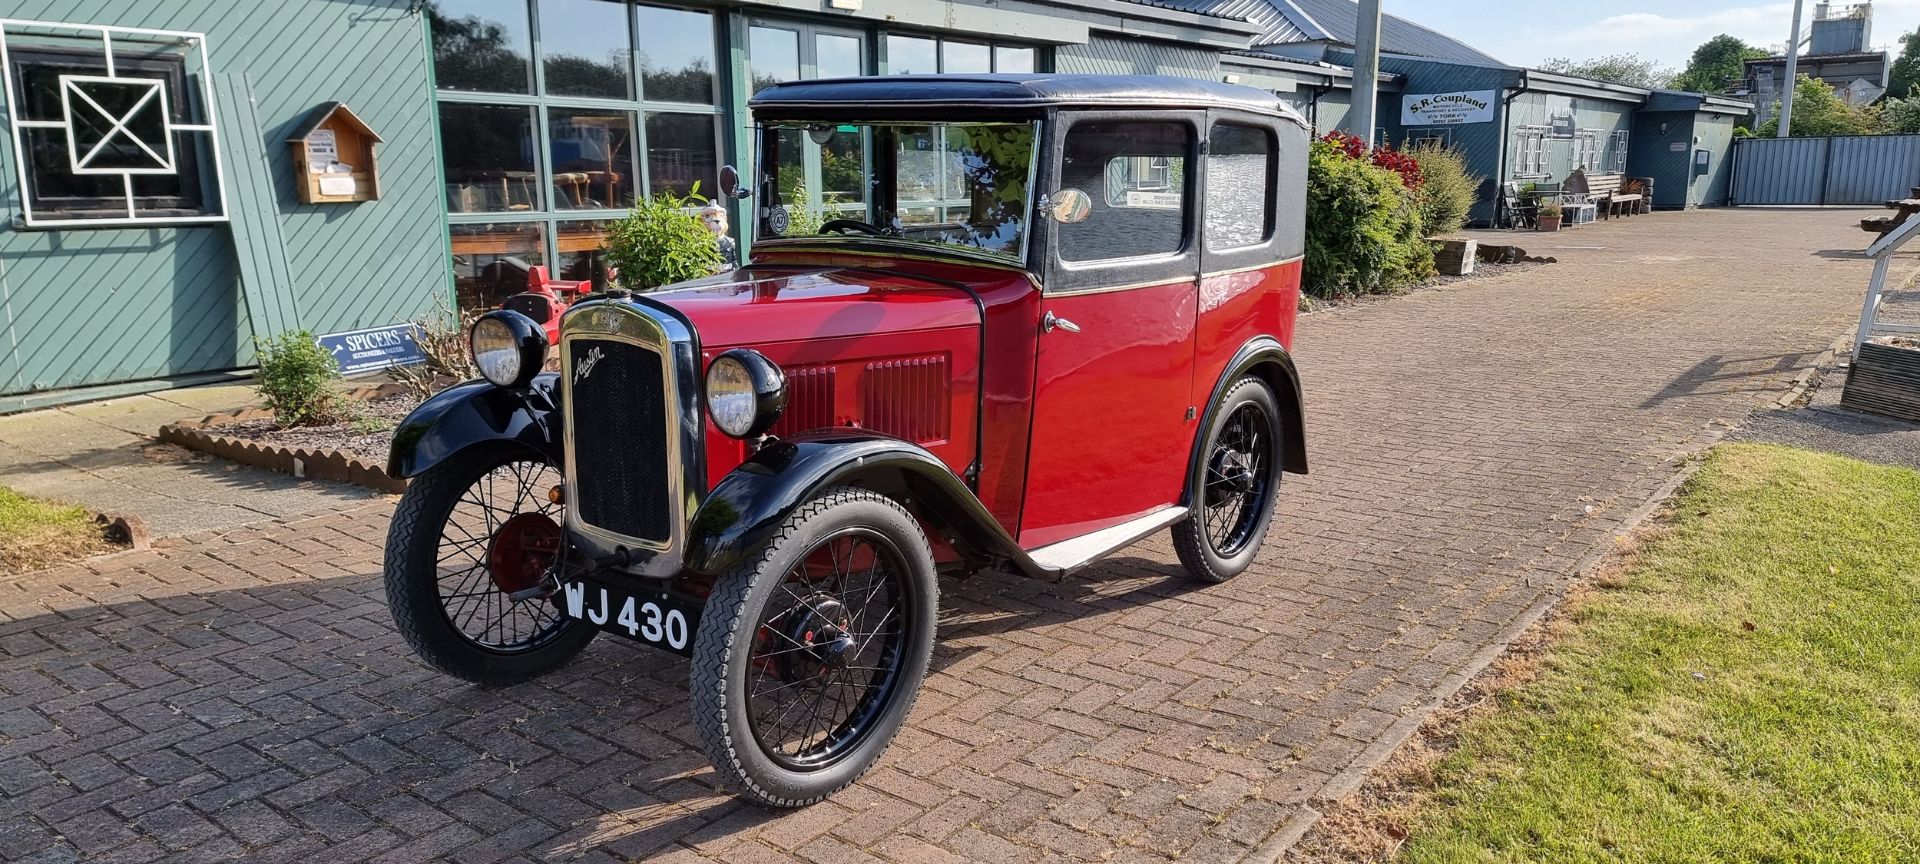 1931 Austin Seven Mulliner Saloon, 700cc. Registration number WJ 430 (non transferrable). Chassis - Image 2 of 12